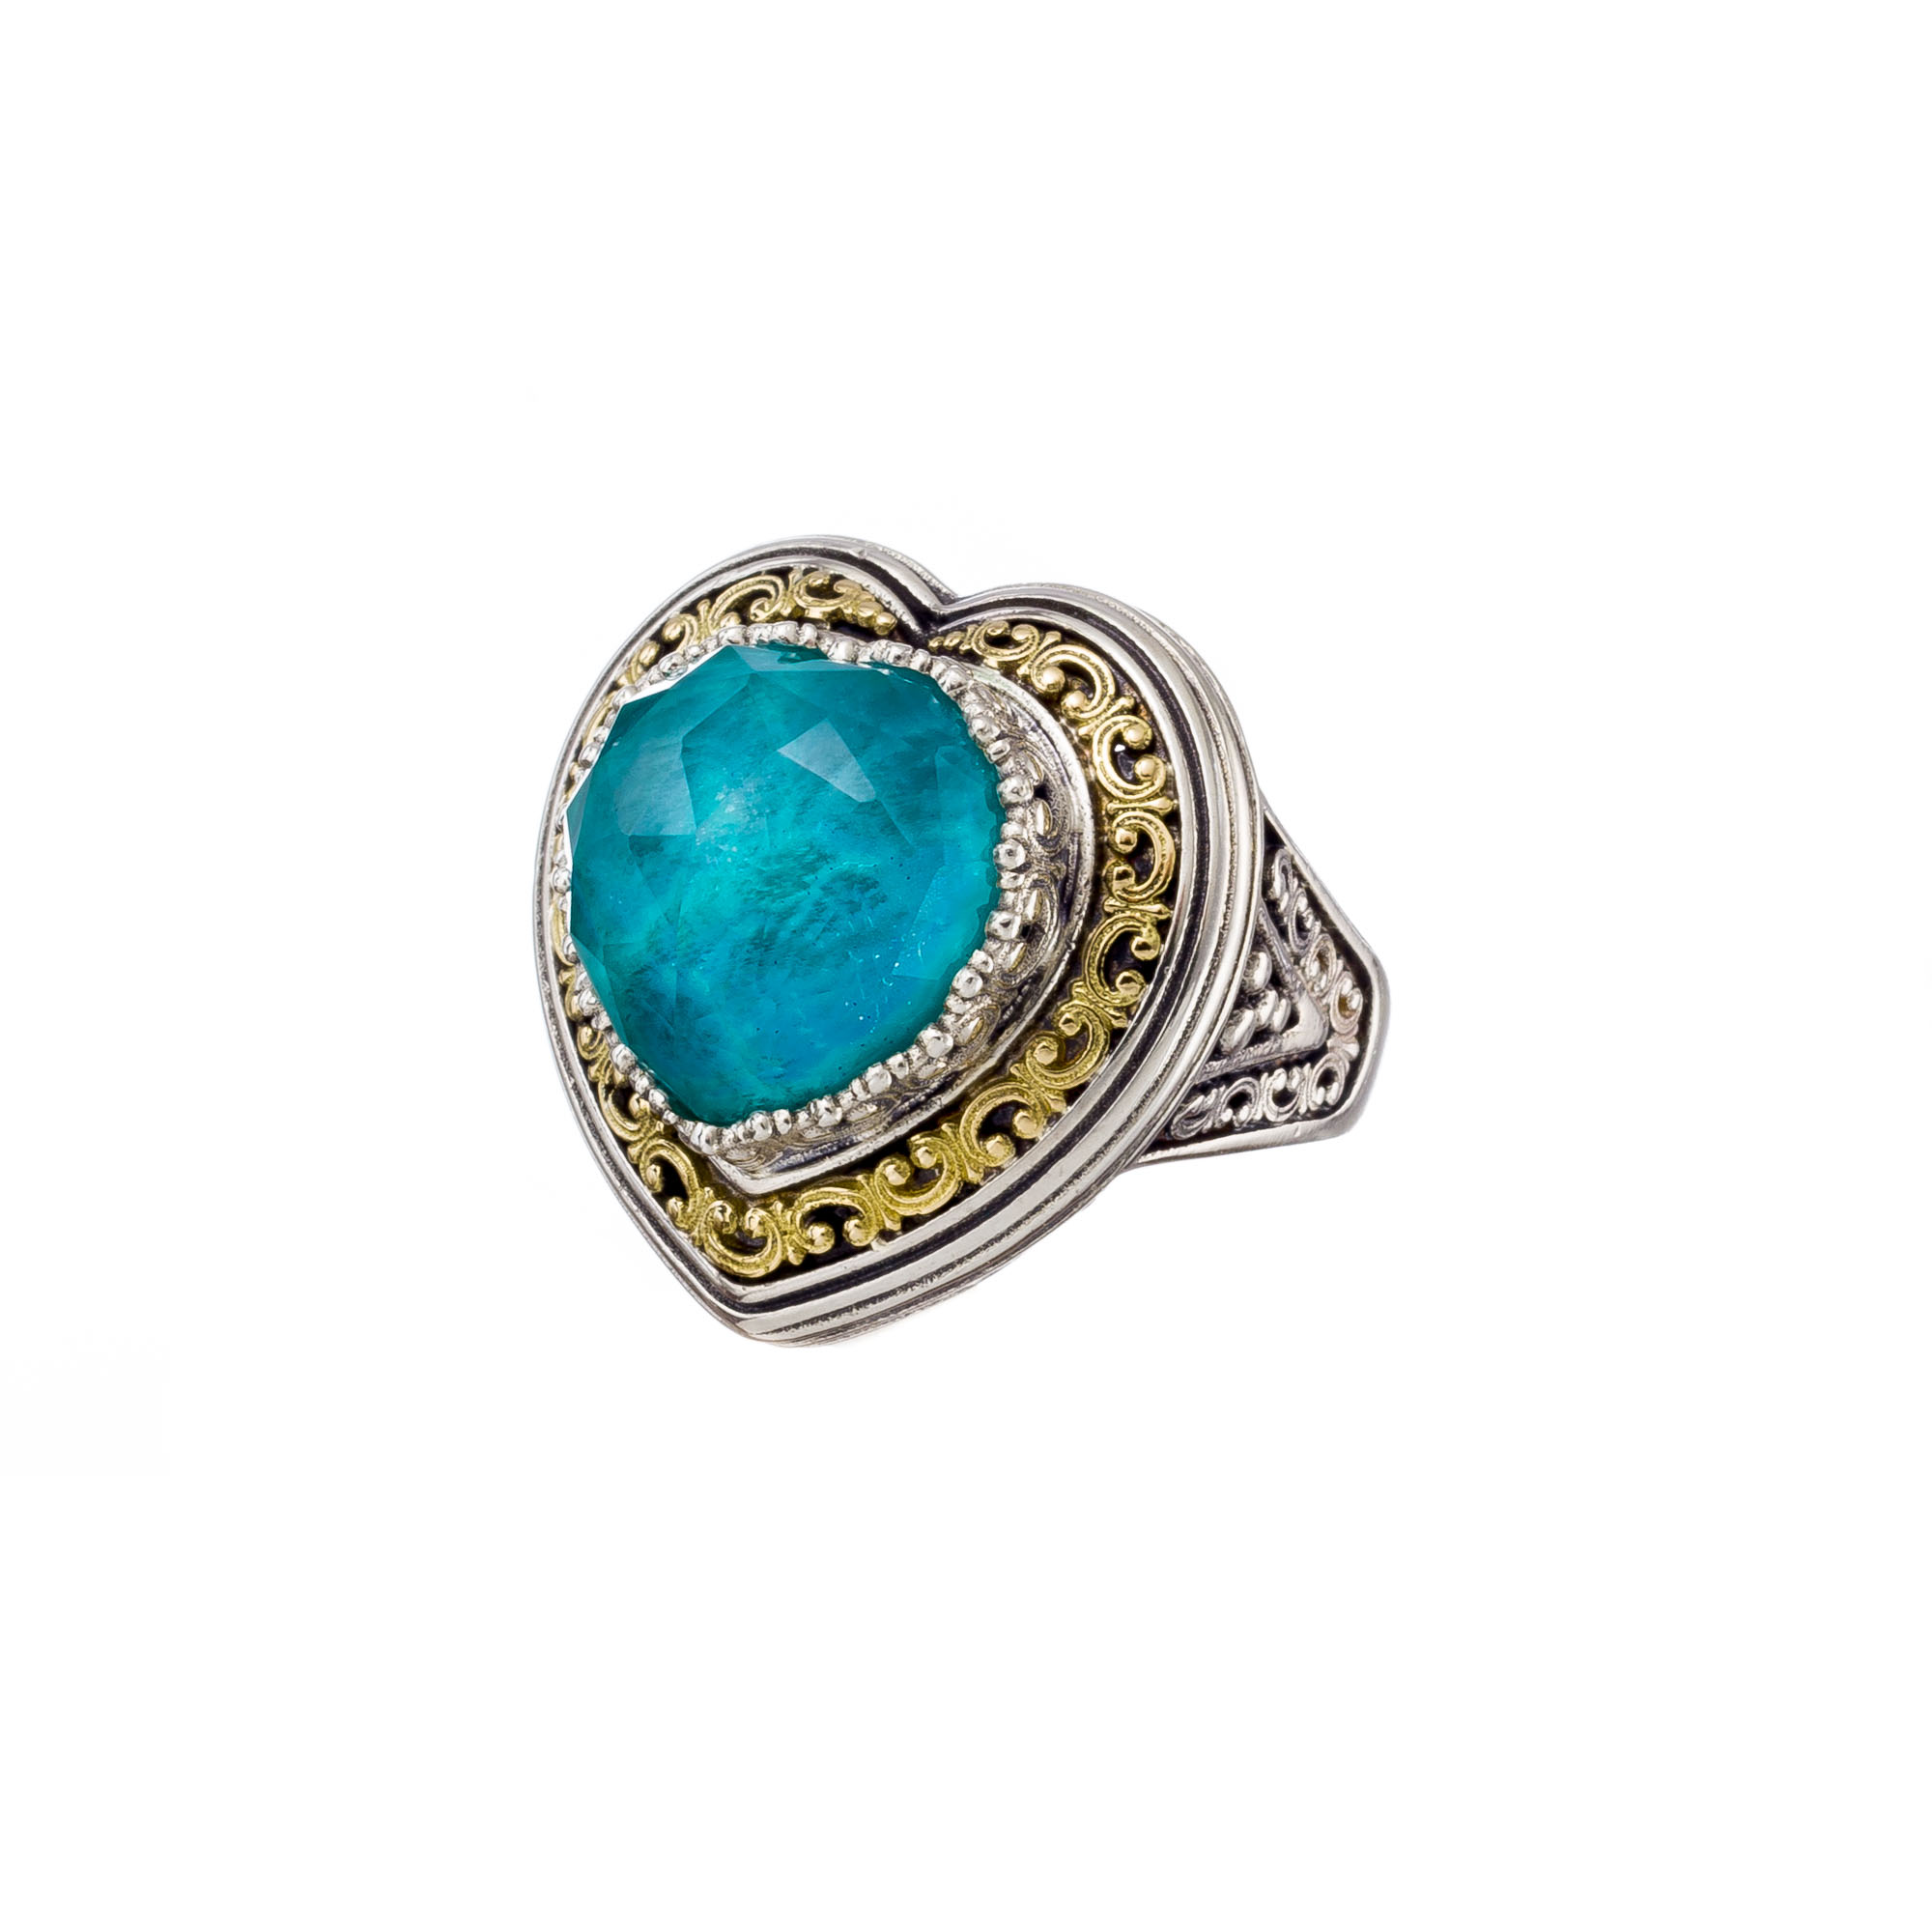 Iris Heart ring in 18K Gold and sterling silver with doublet stone